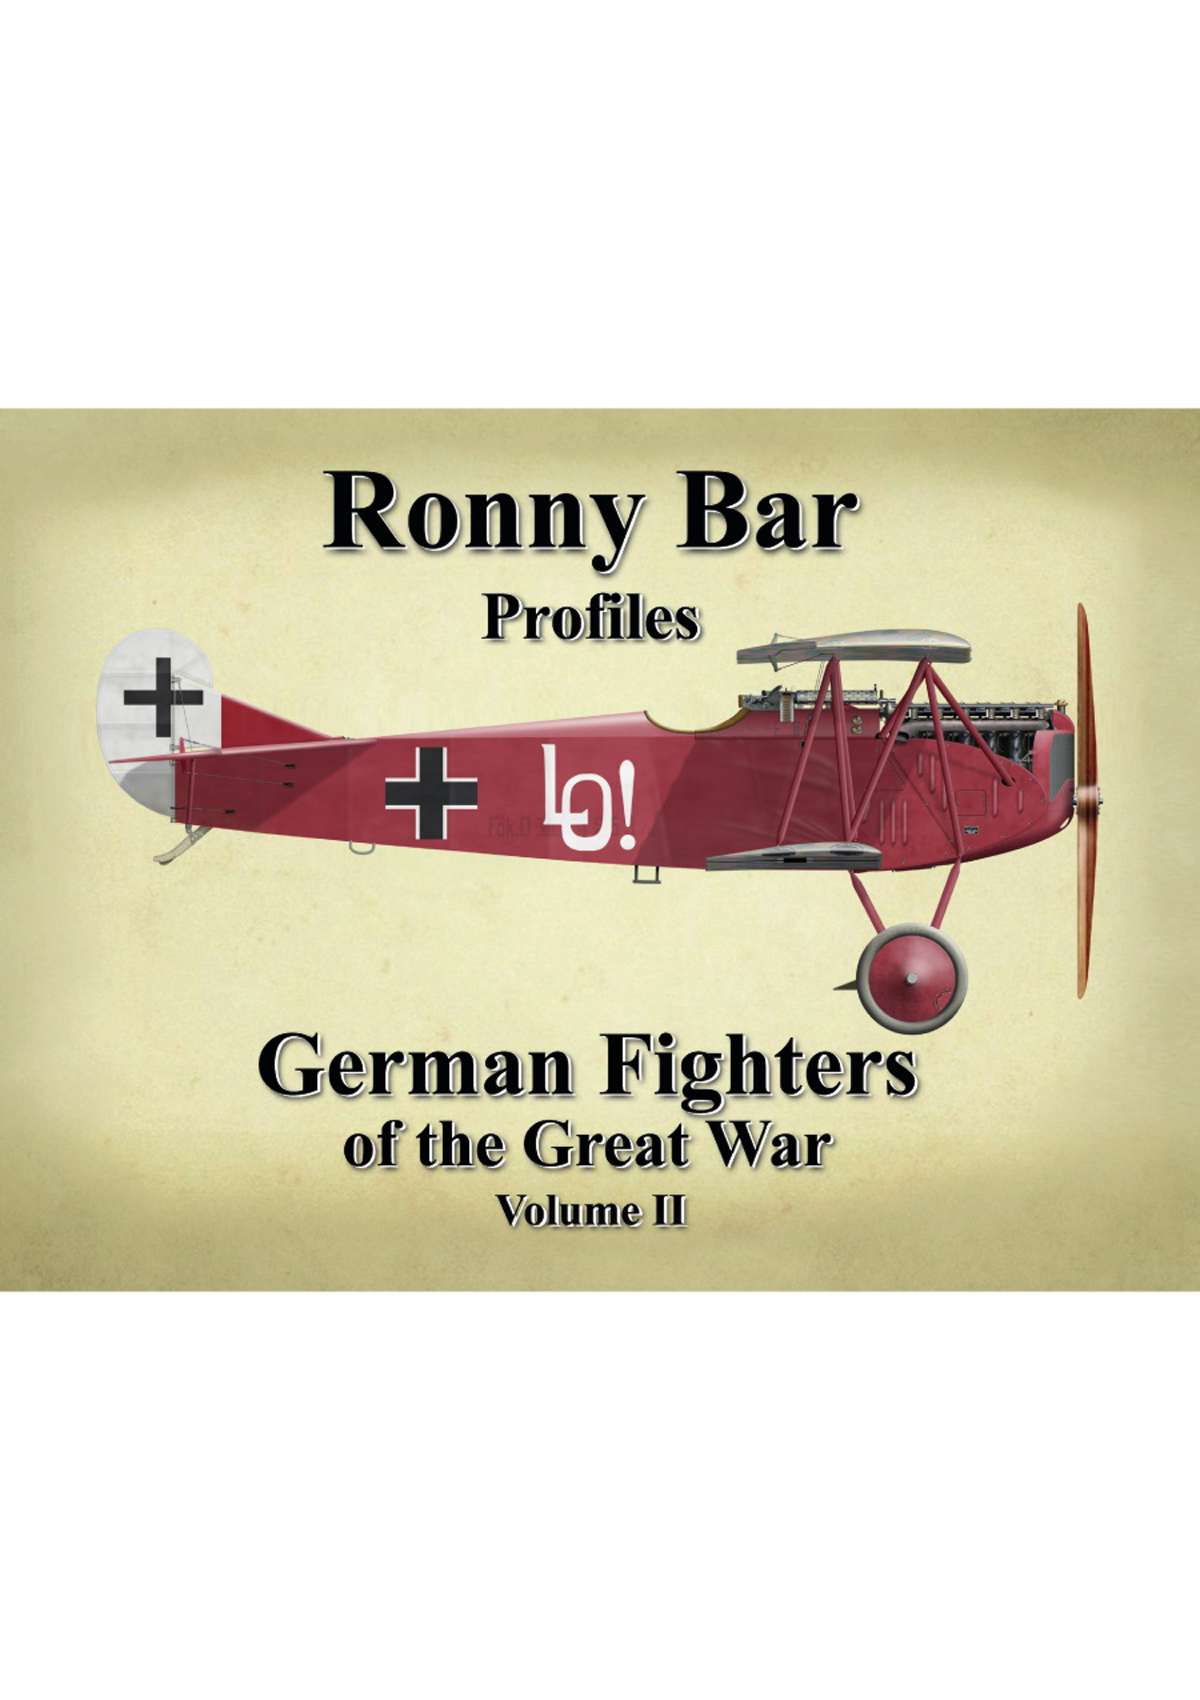 Book: Ronny Bar Profiles - German Fighters of the Great War Vol 2